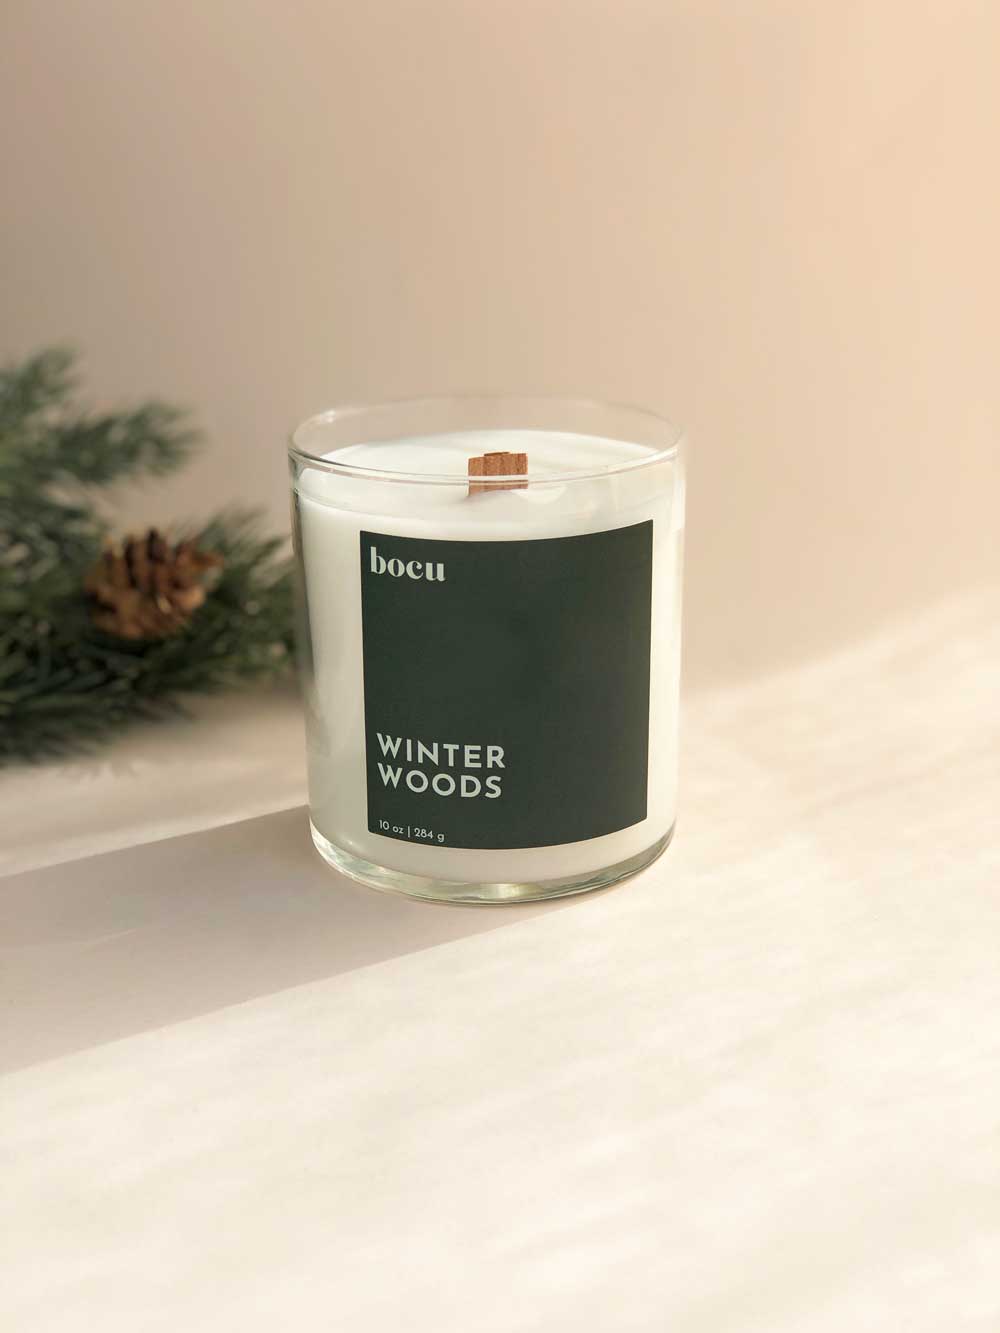 Winter Woods Candle, hand poured in Maine with coconut and soy wax. 10 oz jar. 